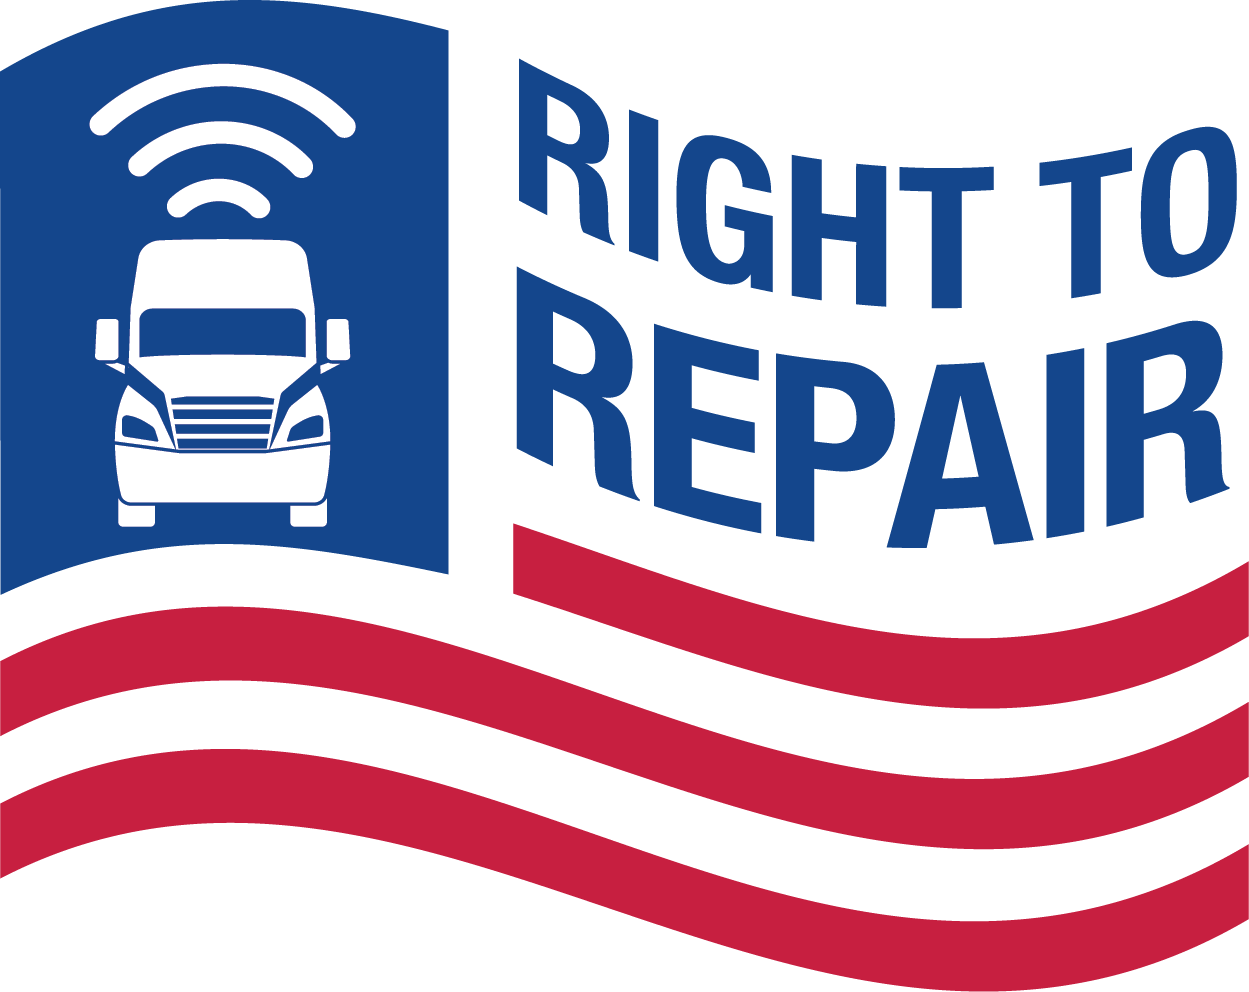 Right to Repair with Truck color